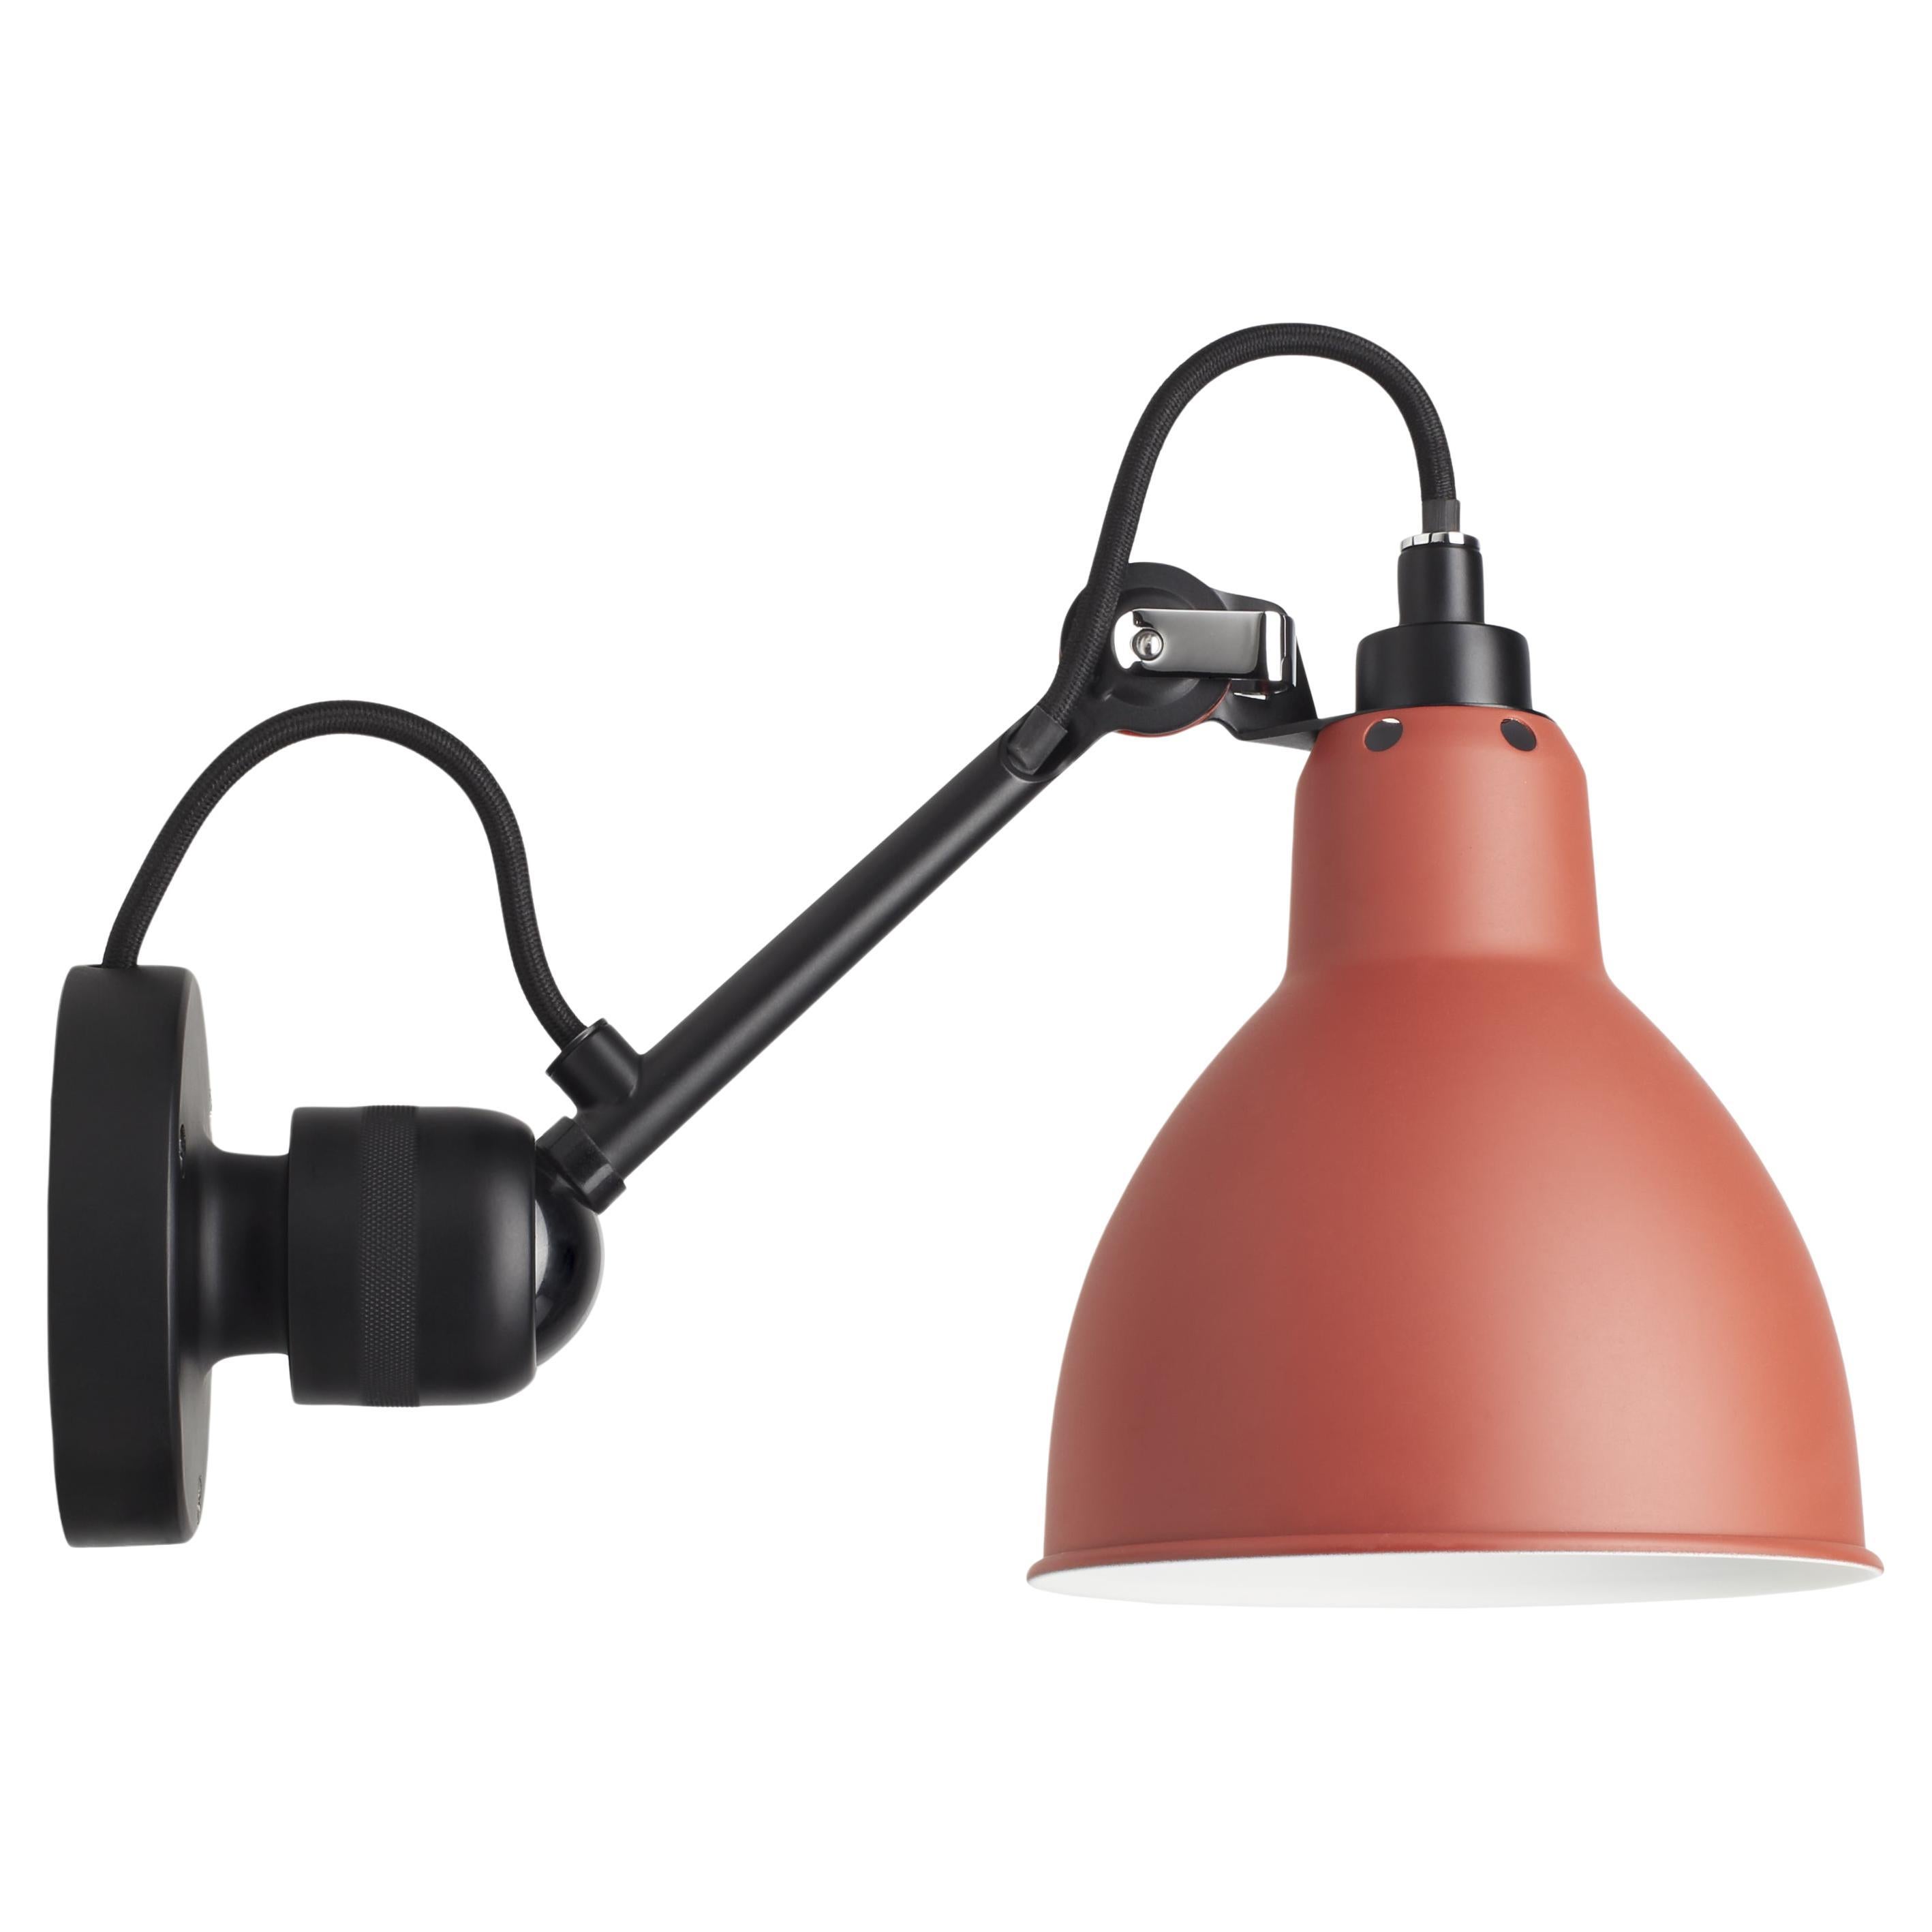 DCW Editions La Lampe Gras N°304 Wall Lamp in Black Arm and Red Shade For Sale